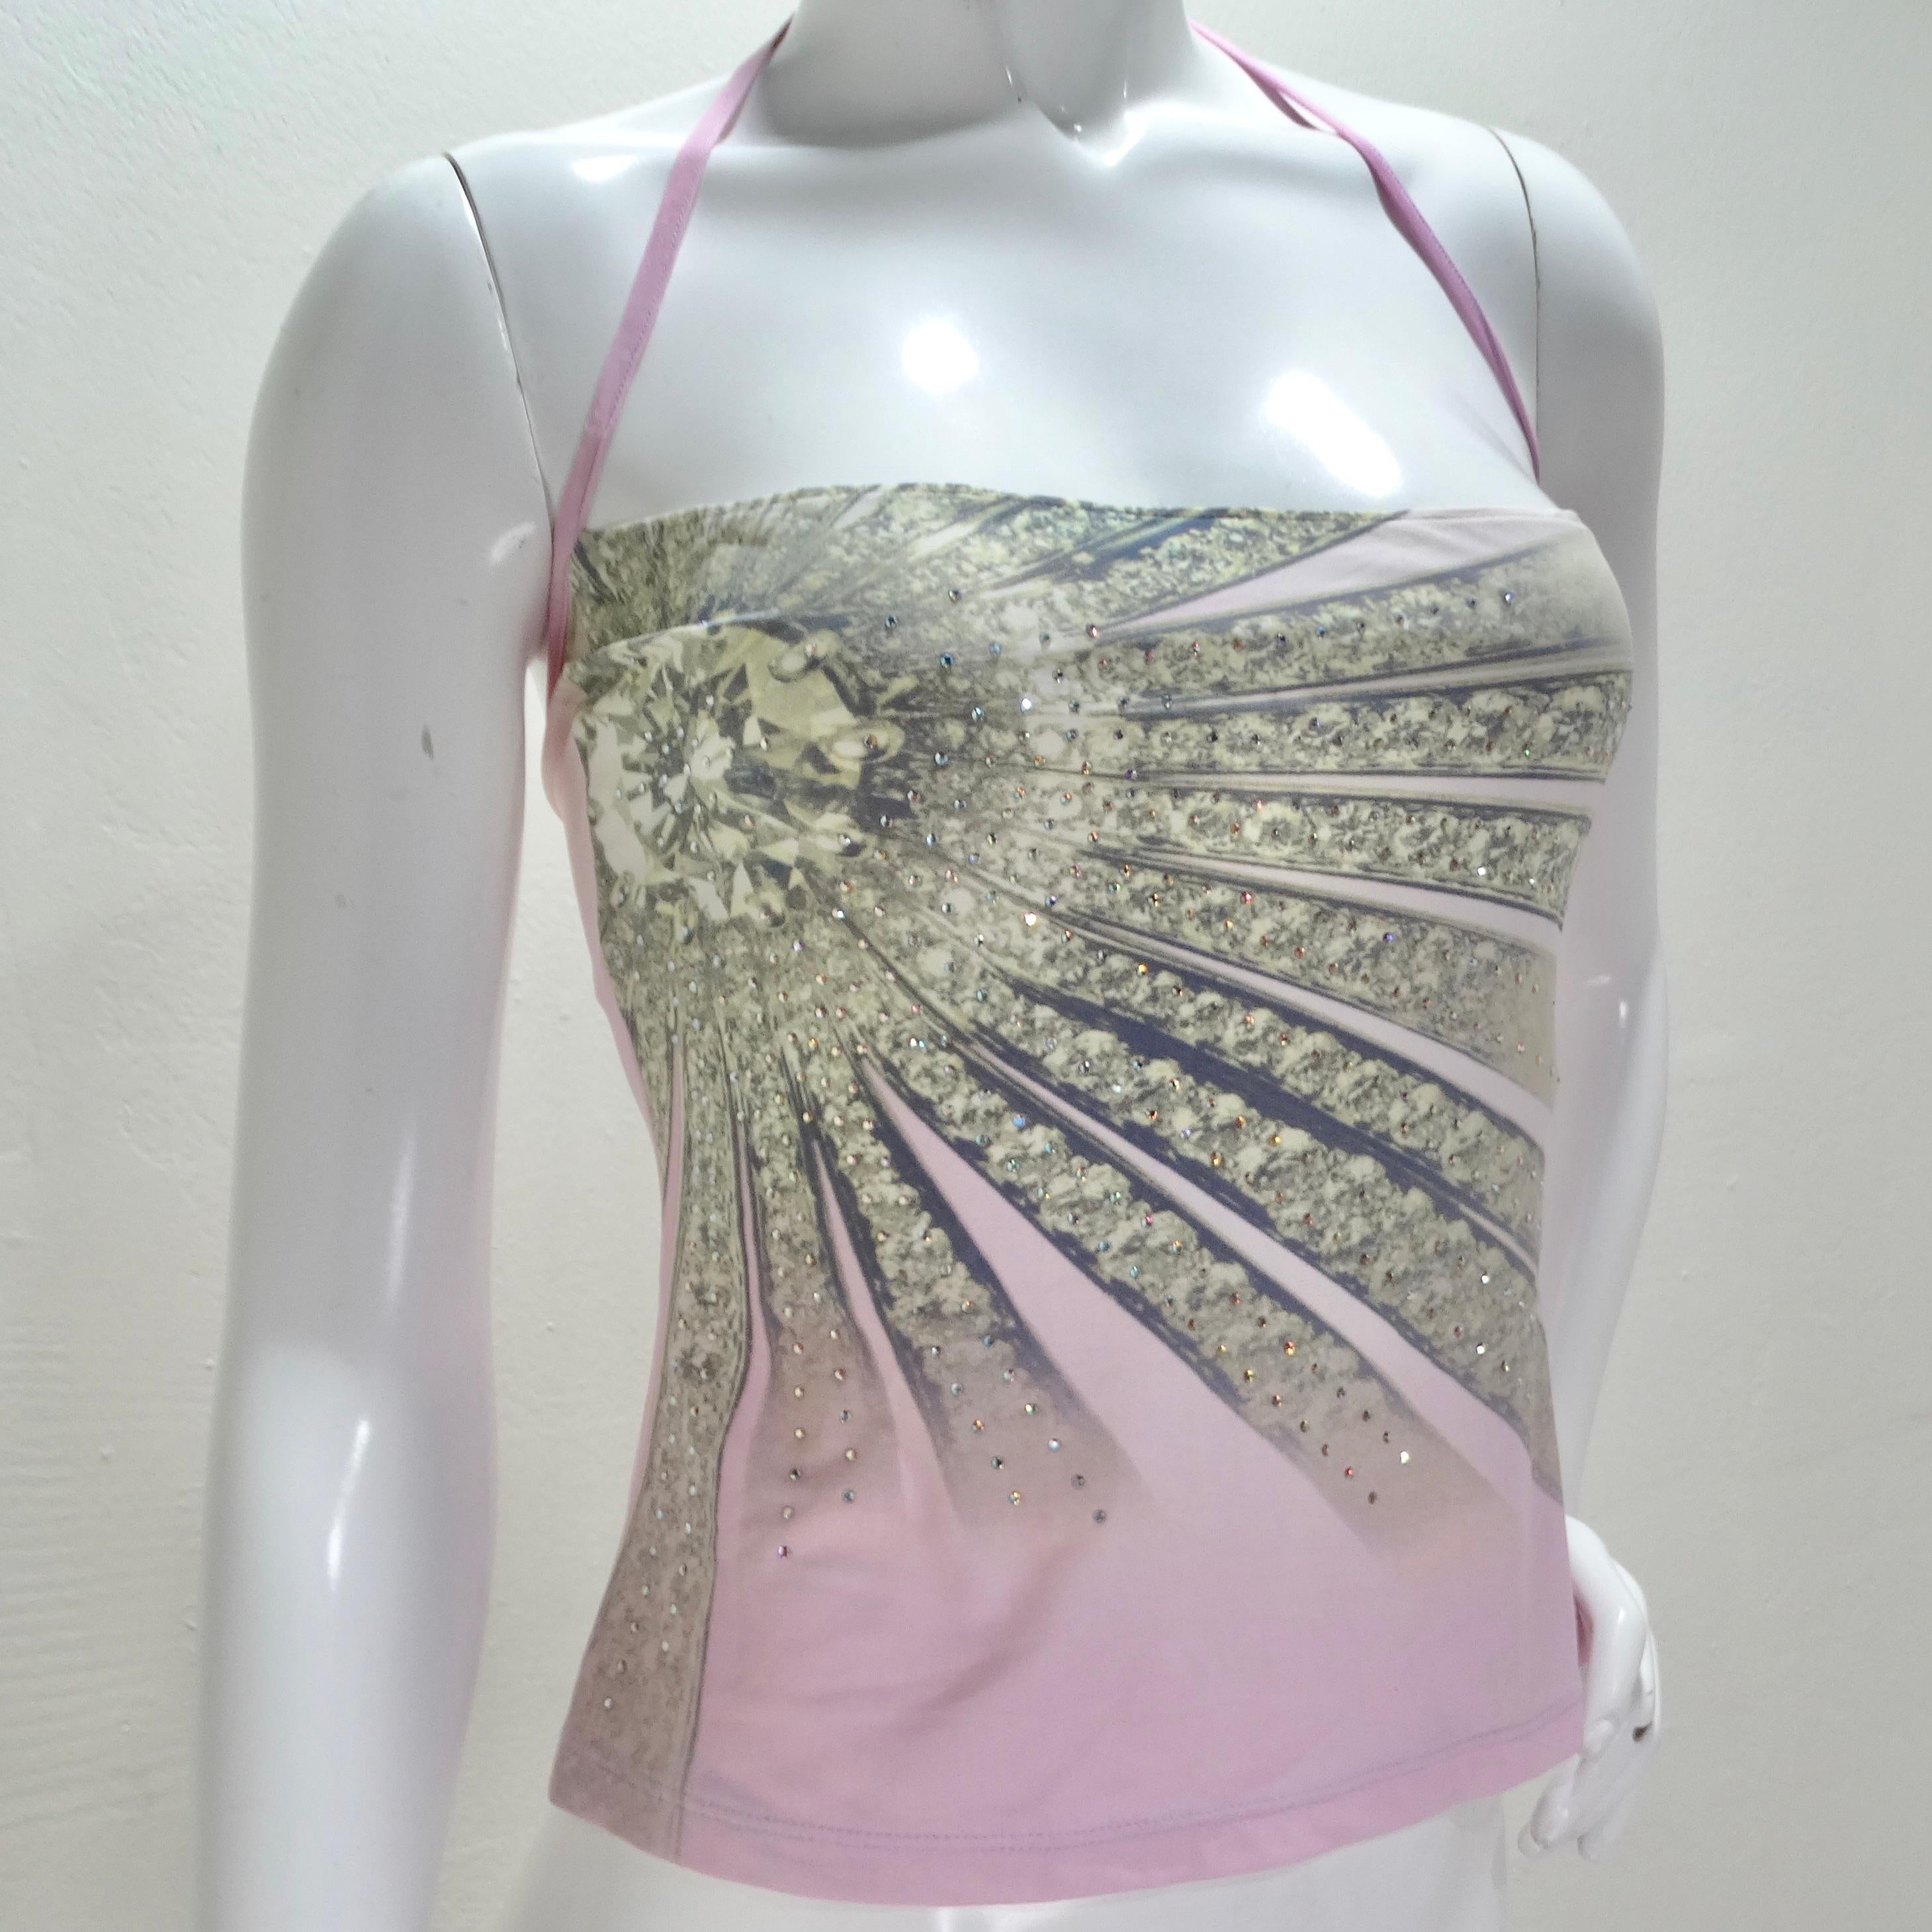 Introducing a piece of fashion history—the Roberto Cavalli Spring/Summer 2000 Pink Crystal Halter Top. This iconic pink halter-style tube top not only showcases the legendary Italian designer's artistic prowess but also epitomizes the glamour and